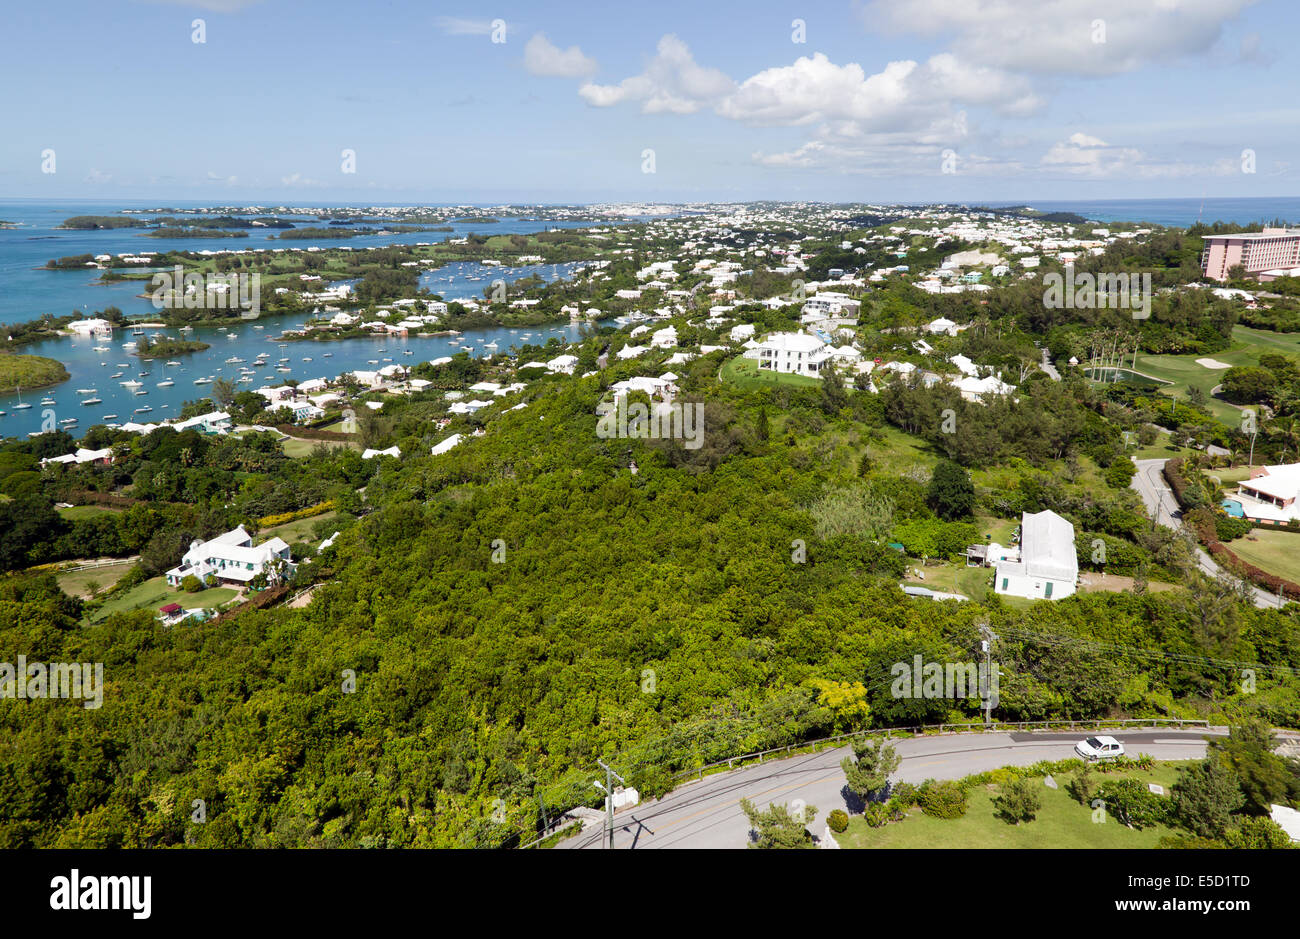 Arial view of the Island of Bermuda, from the Gibb's Hill Lighthouse, looking towards the City of Hamilton. Stock Photo